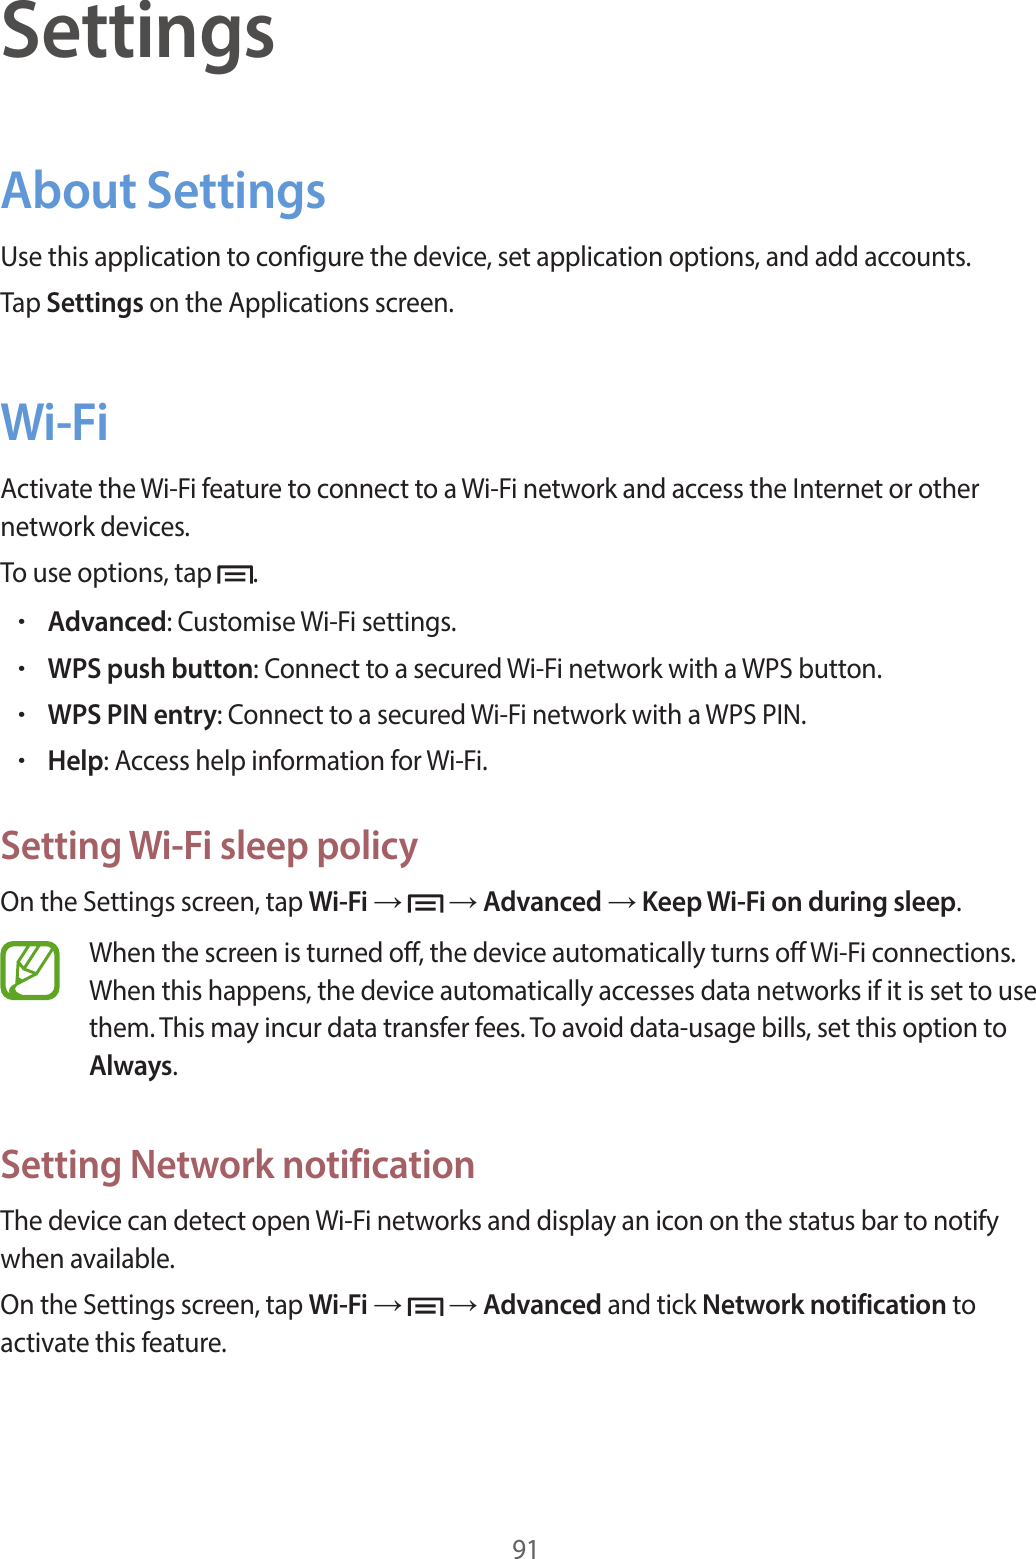 91SettingsAbout SettingsUse this application to configure the device, set application options, and add accounts.Tap Settings on the Applications screen.Wi-FiActivate the Wi-Fi feature to connect to a Wi-Fi network and access the Internet or other network devices.To use options, tap  .•Advanced: Customise Wi-Fi settings.•WPS push button: Connect to a secured Wi-Fi network with a WPS button.•WPS PIN entry: Connect to a secured Wi-Fi network with a WPS PIN.•Help: Access help information for Wi-Fi.Setting Wi-Fi sleep policyOn the Settings screen, tap Wi-Fi →   → Advanced → Keep Wi-Fi on during sleep.When the screen is turned off, the device automatically turns off Wi-Fi connections. When this happens, the device automatically accesses data networks if it is set to use them. This may incur data transfer fees. To avoid data-usage bills, set this option to Always.Setting Network notificationThe device can detect open Wi-Fi networks and display an icon on the status bar to notify when available.On the Settings screen, tap Wi-Fi →   → Advanced and tick Network notification to activate this feature.